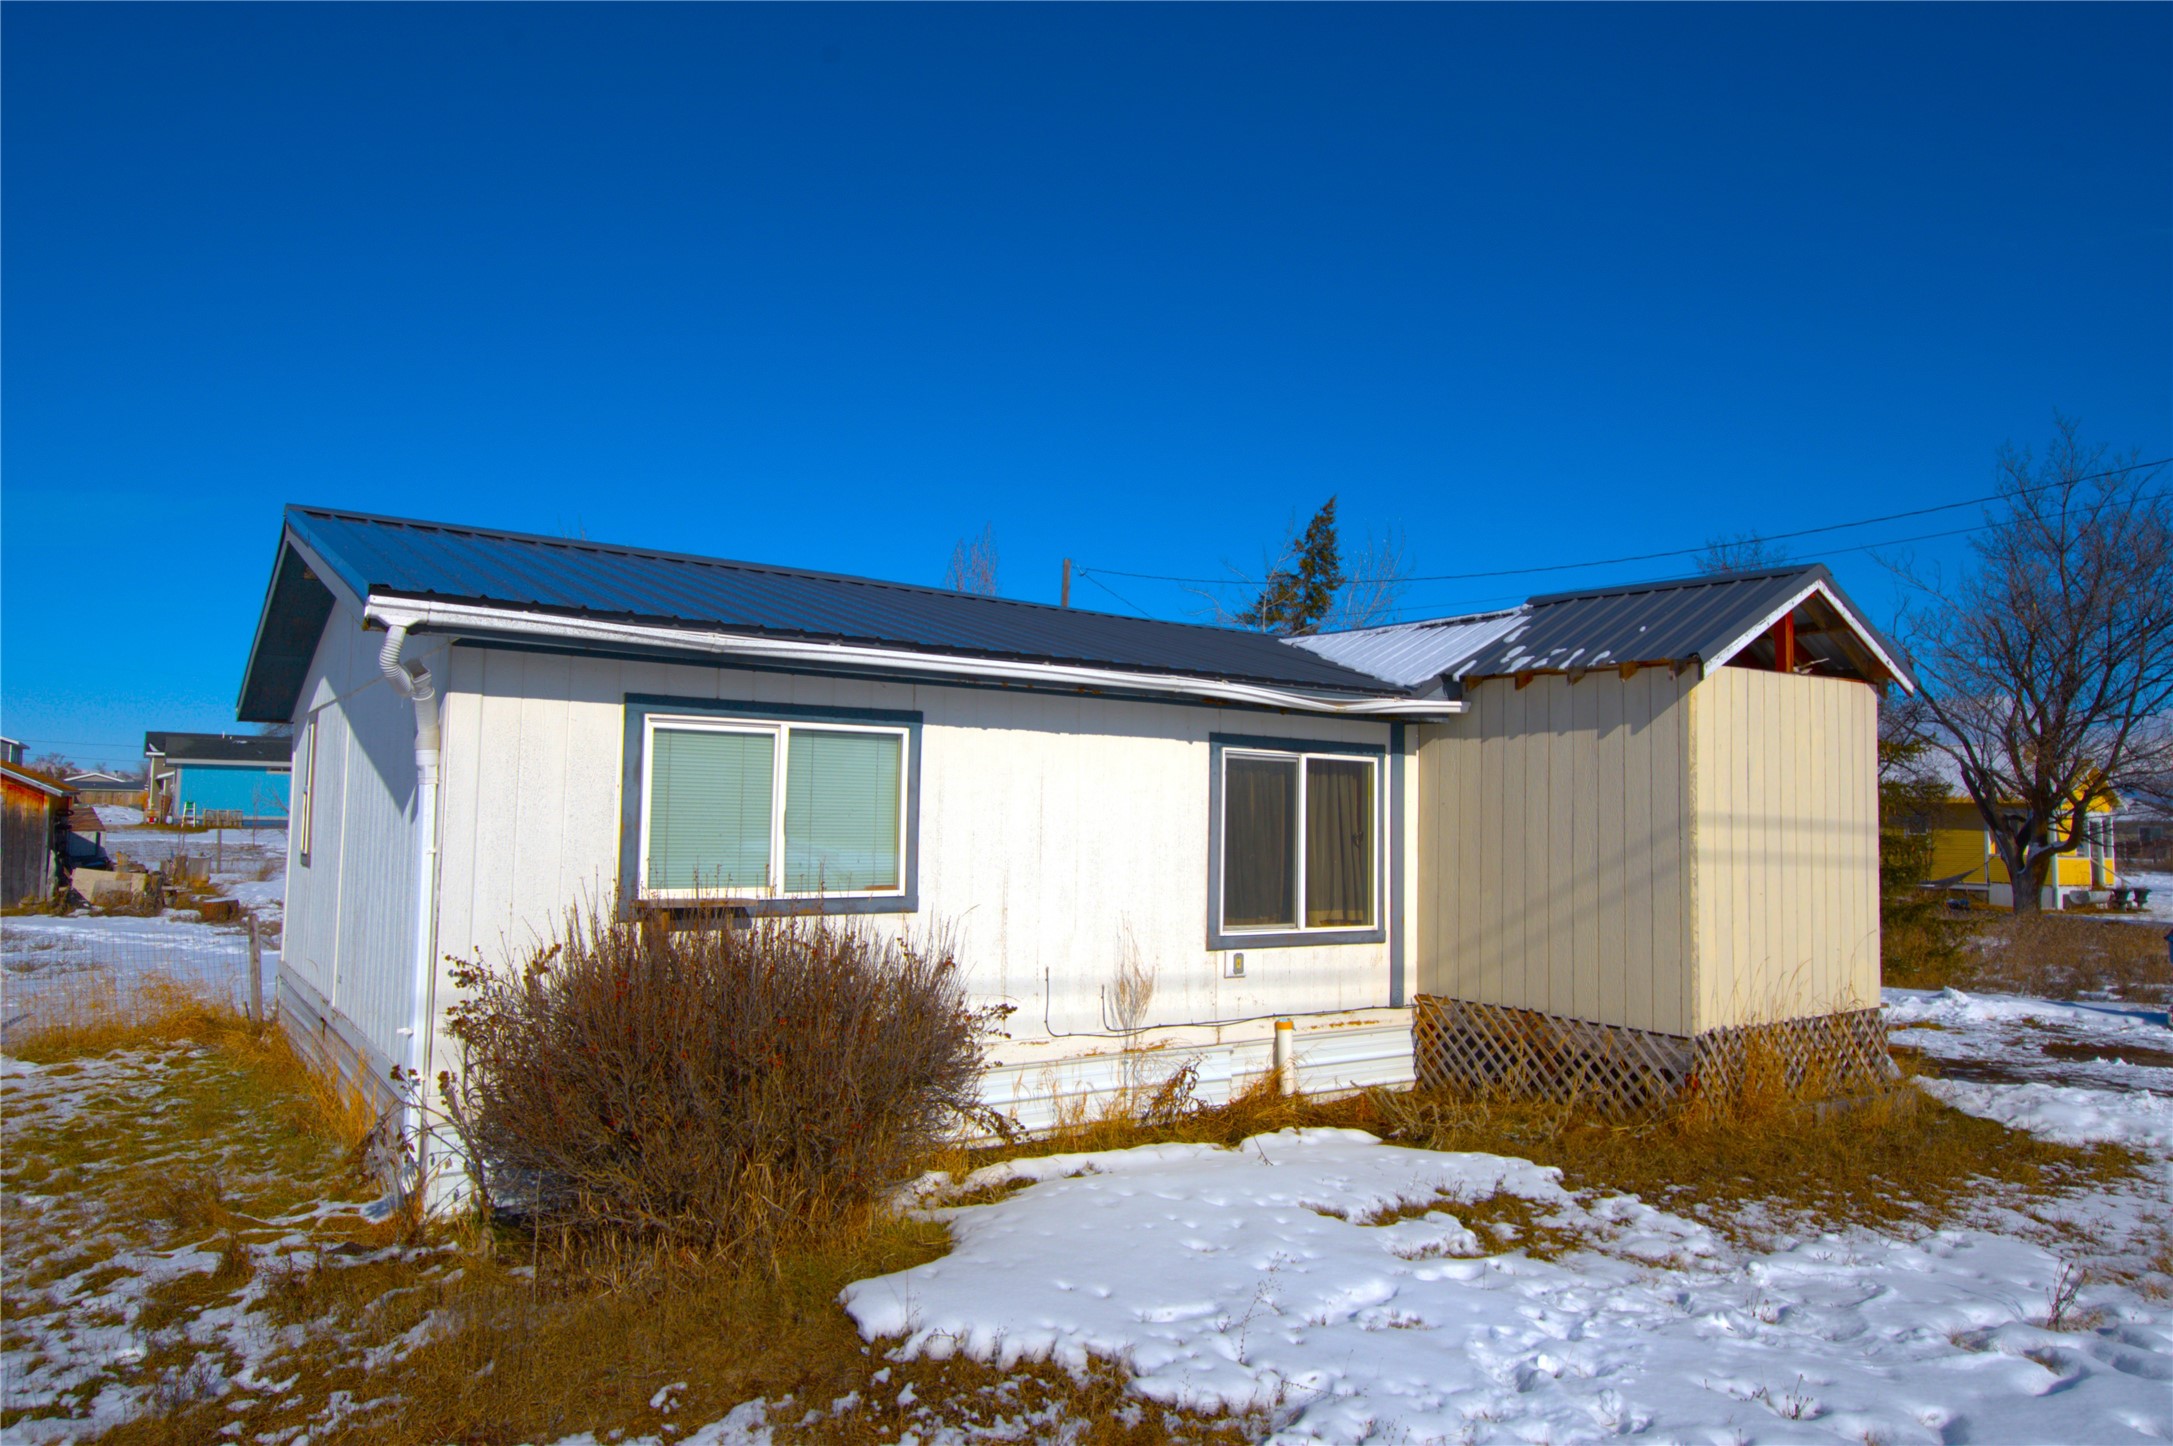 3 bed, 2 bath manufactured home in beautiful Somers, Montana! Across the street from Somers Middle School, and moments from world-renowned Flathead Lake. Home is on a .29 Acre lot, on a quiet residential street with recreational trails and lake access nearby. The home has been de-titled, which may provide more financing options for prospective buyers. To schedule your showing, call Aaron Norton at (406)250-0474 or your Real Estate Professional.